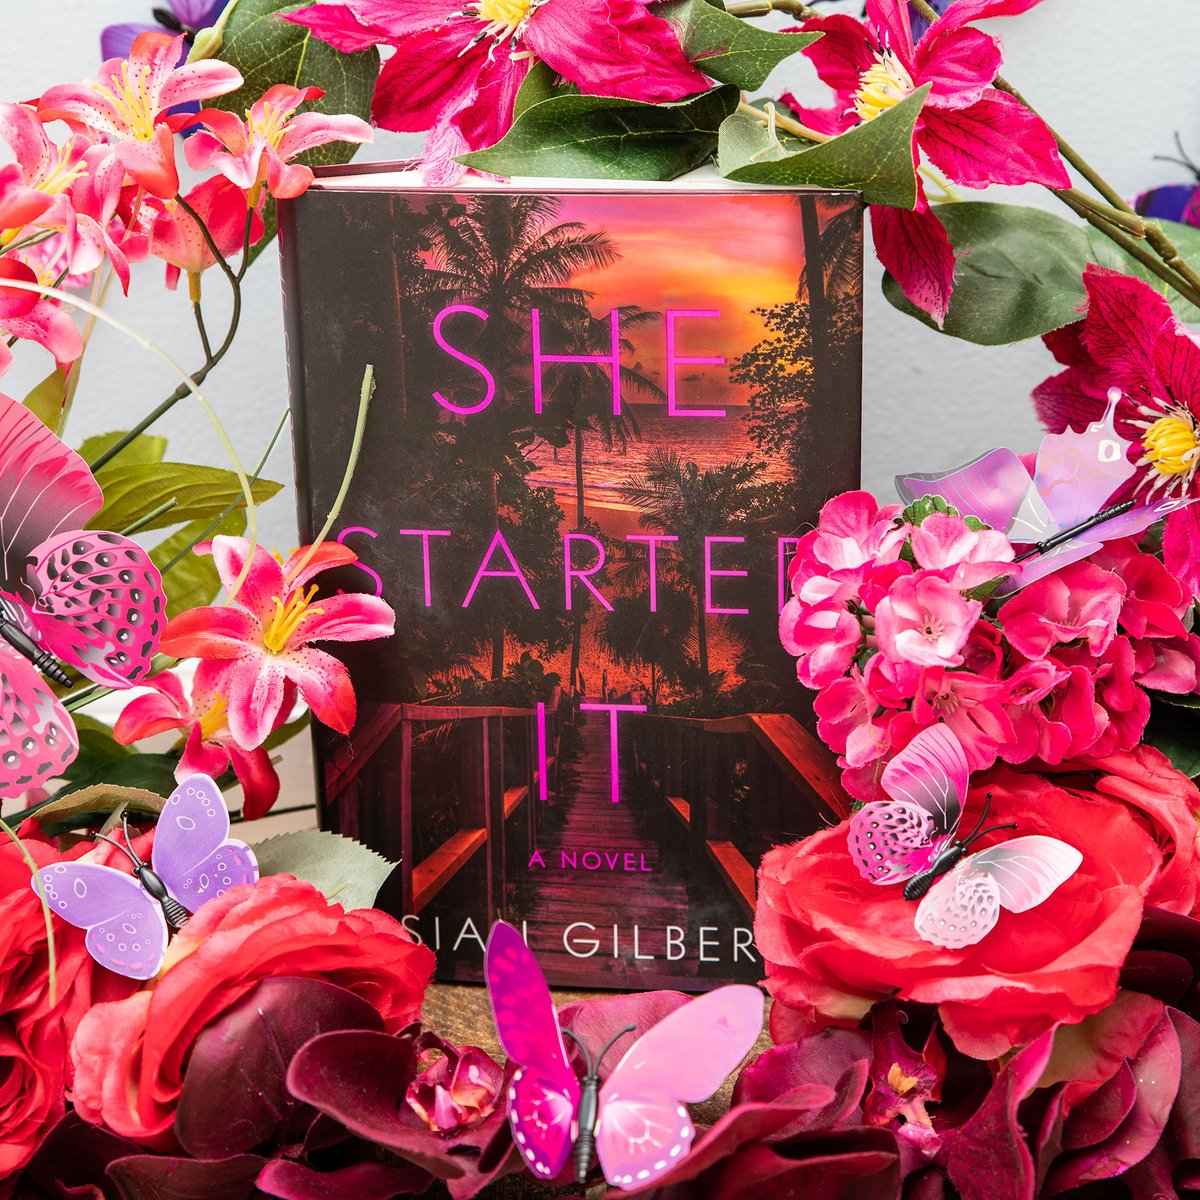 Haven't done a #bookstagram photo in awhile but the best time to break out the skill is to celebrate the release of a #PitchWars pal's book! Congrats @SianMGilbert on this beauty of a book, I cannot wait to dig in!! 

Amazon: a.co/d/5Yt3w6z
B&N: barnesandnoble.com/s/9780063286290